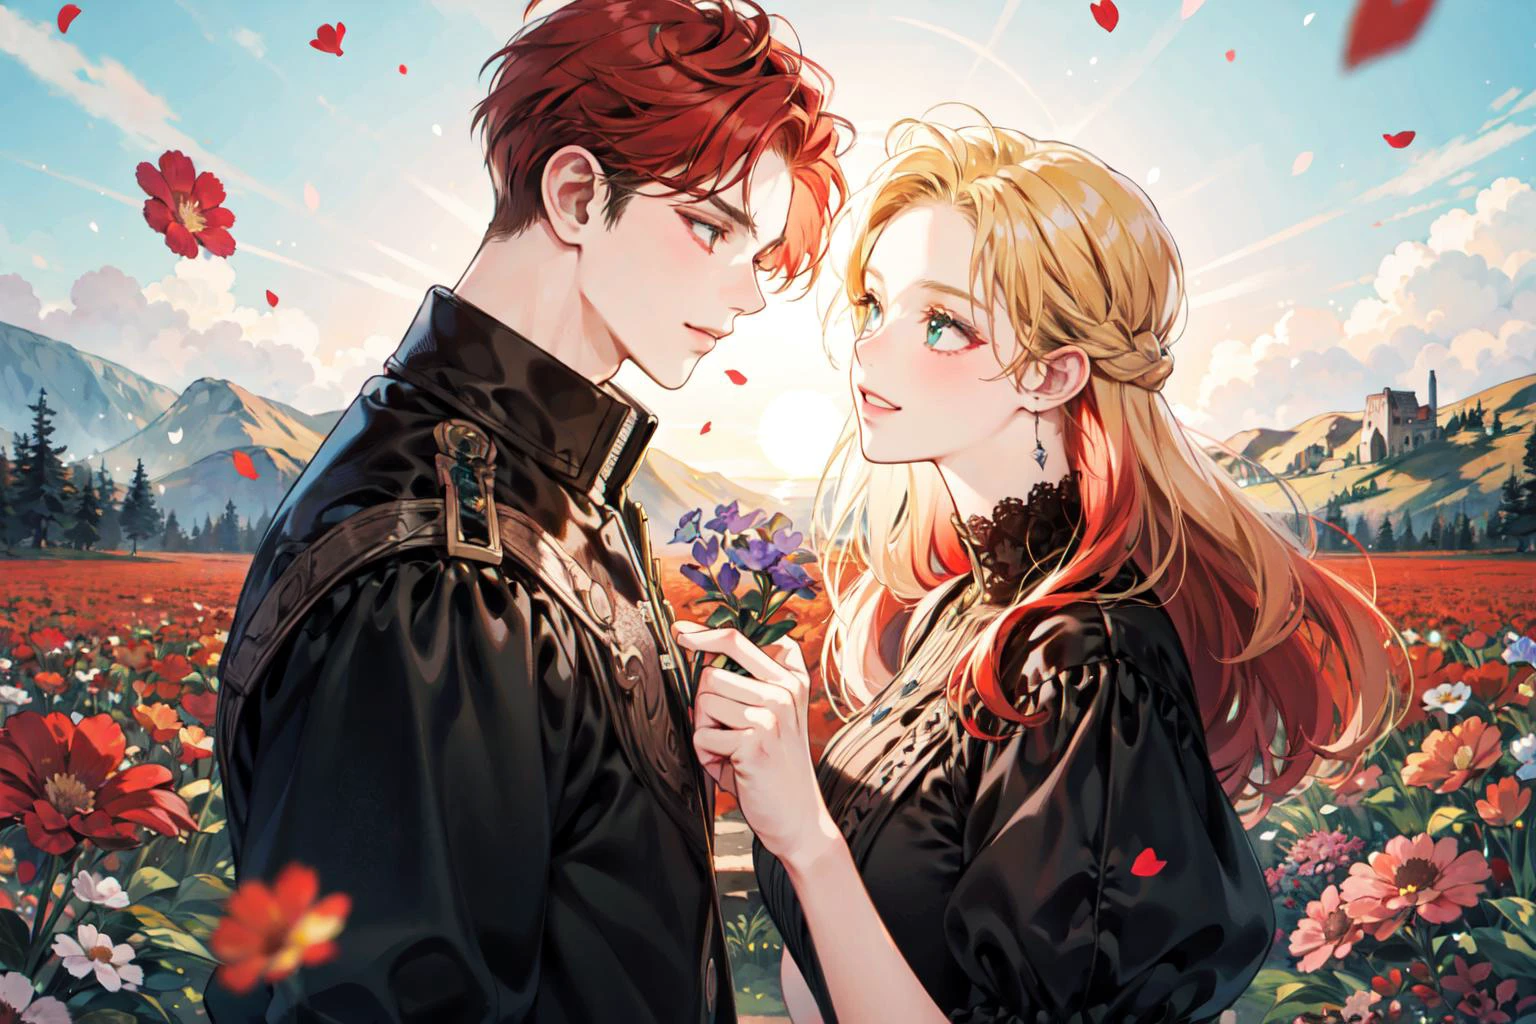 masterpiece, best quality, 2others, couple, hetero, 1man with 1woman, red hair and Blonde, height difference, different colors, happy, love, flower-filled landscape, forehead